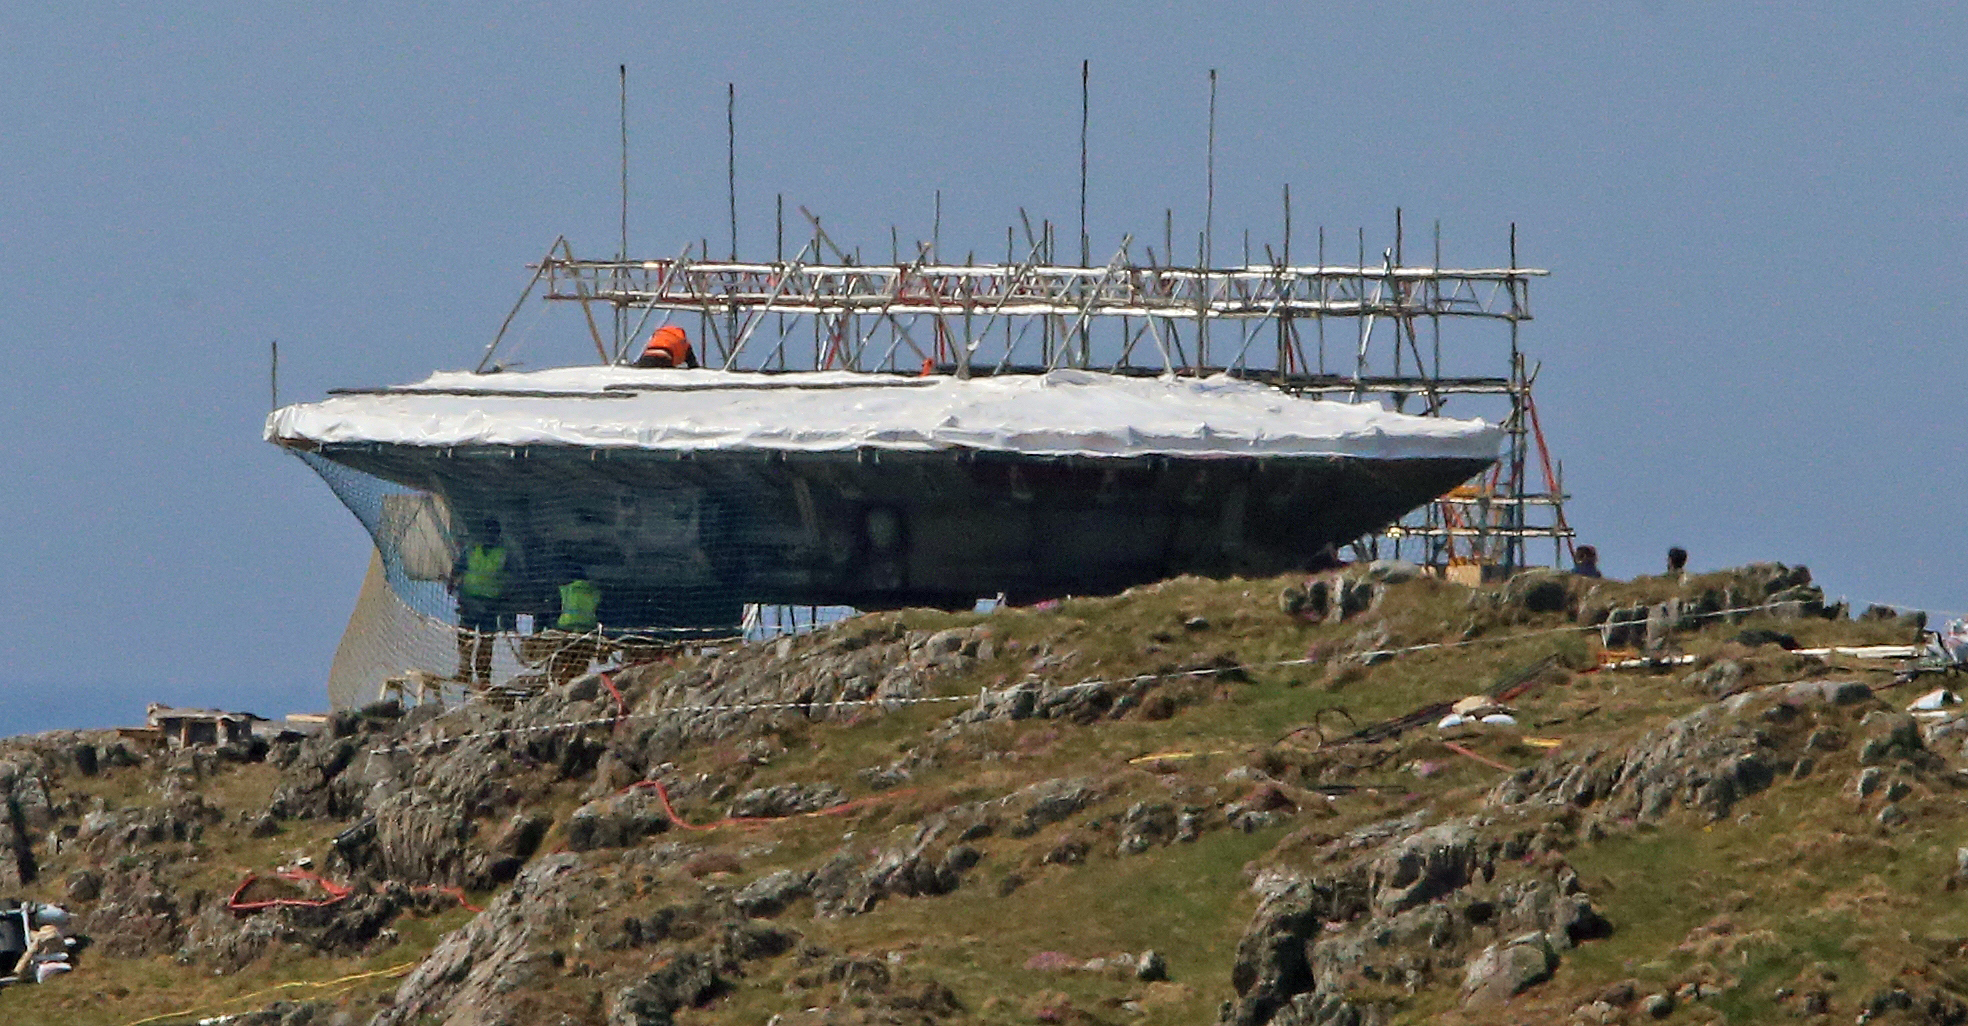 A set is created in Malin Head, Co Donegal Ireland, as filming for the next Star Wars movie will take place there, May 12, 2016. (Niall Carson—PA Wire/Press Association Images/AP)